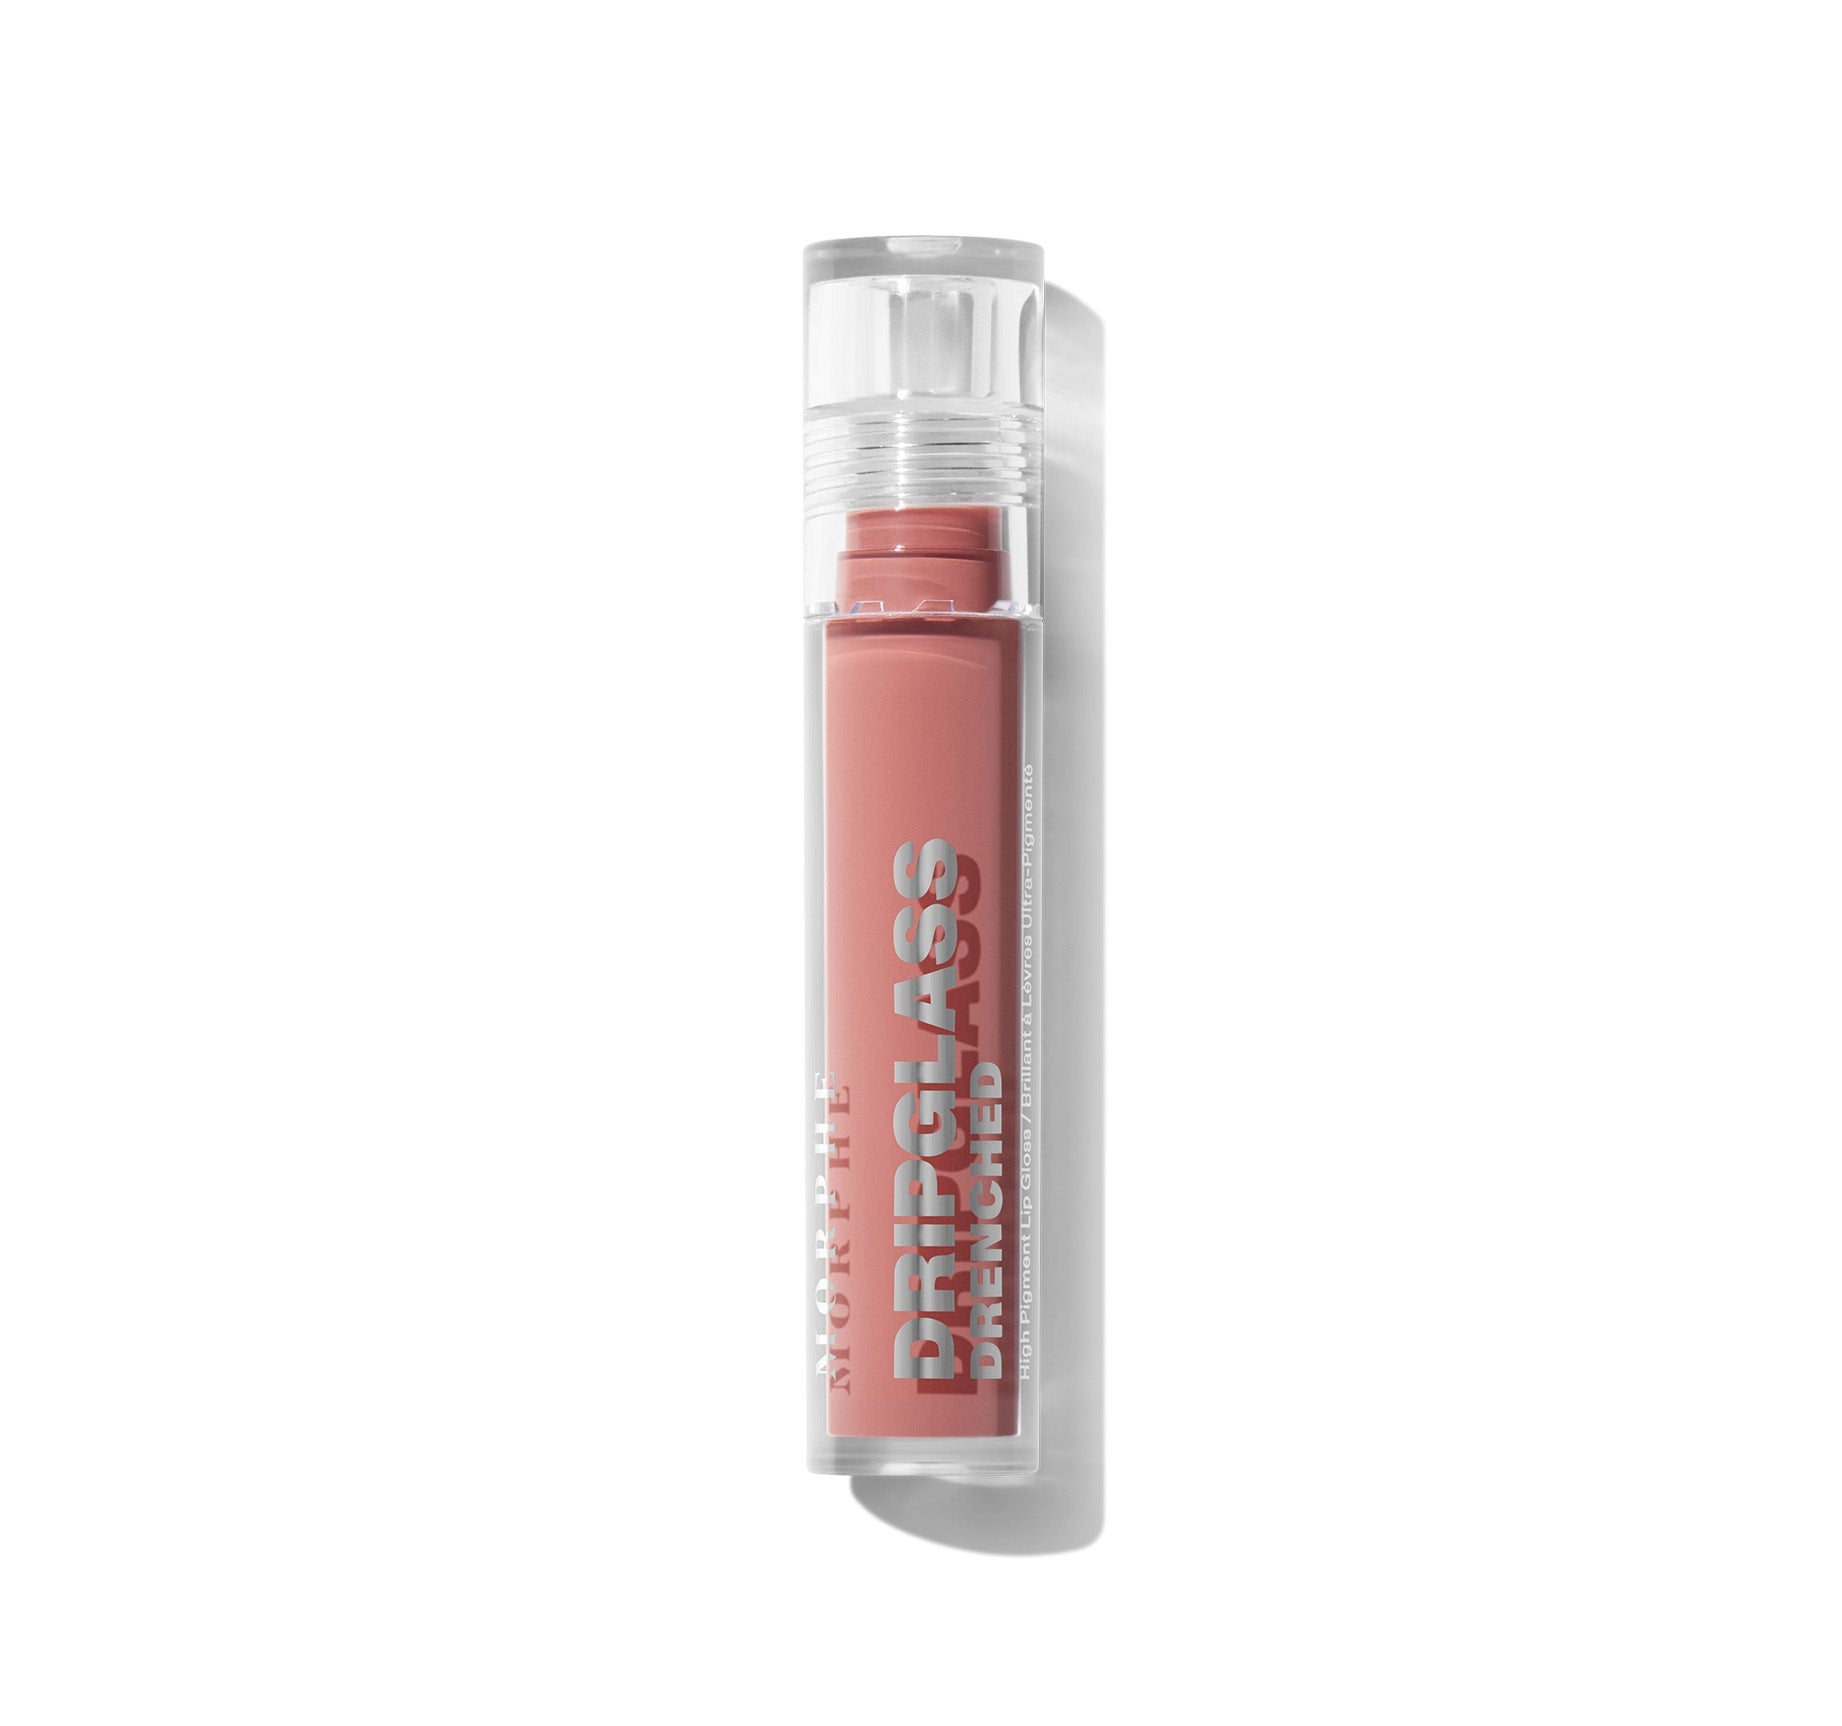 Dripglass Drenched High Pigment Lip Gloss - Wet Peach - Image 10